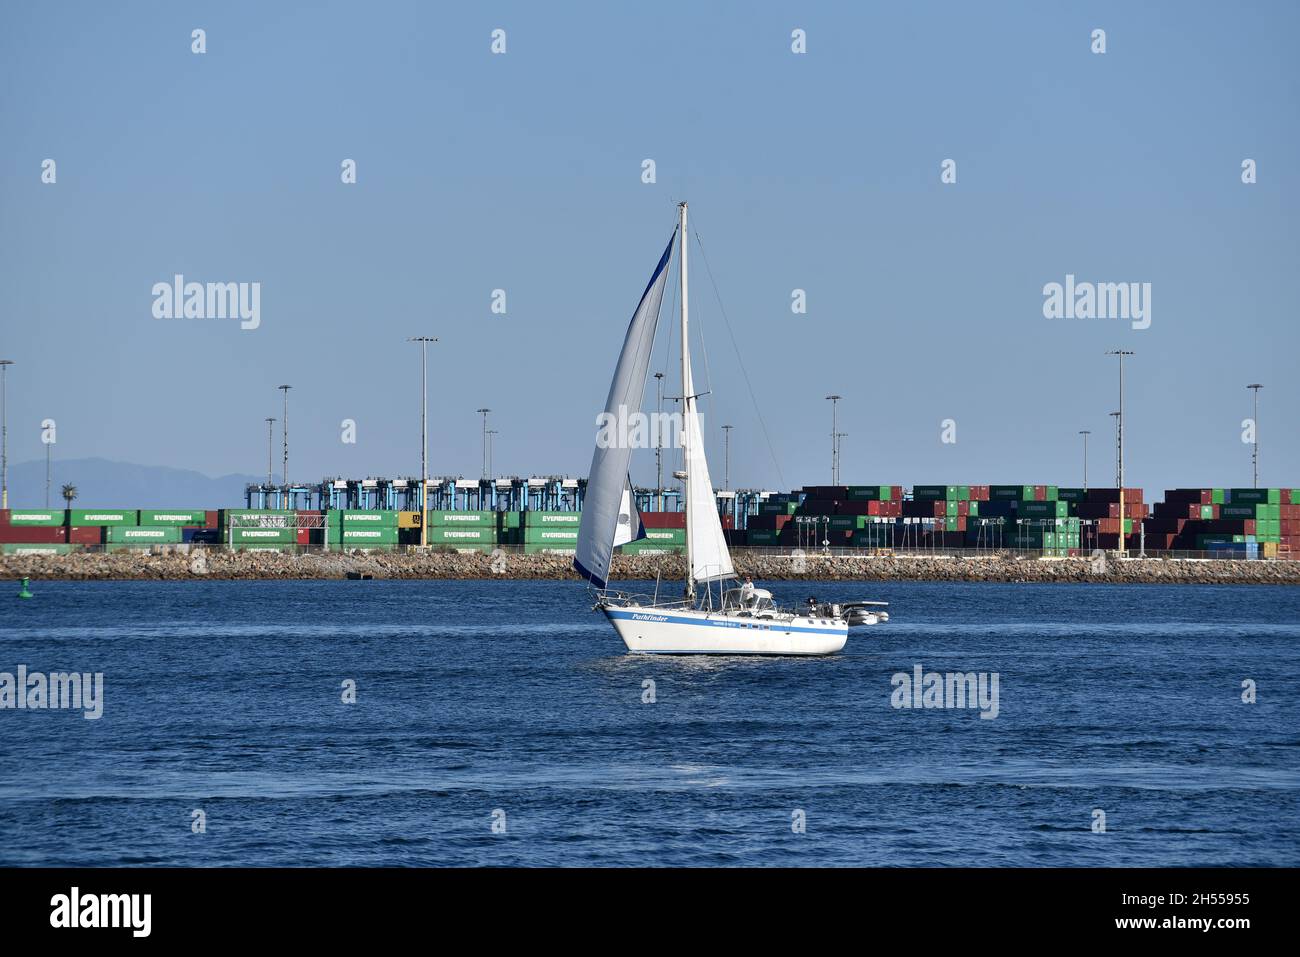 Los Angeles, CA USA - October 15, 2021: Sailboat passing shipping containers and gantry cranes in the main channel of the Port of Los Angeles Stock Photo